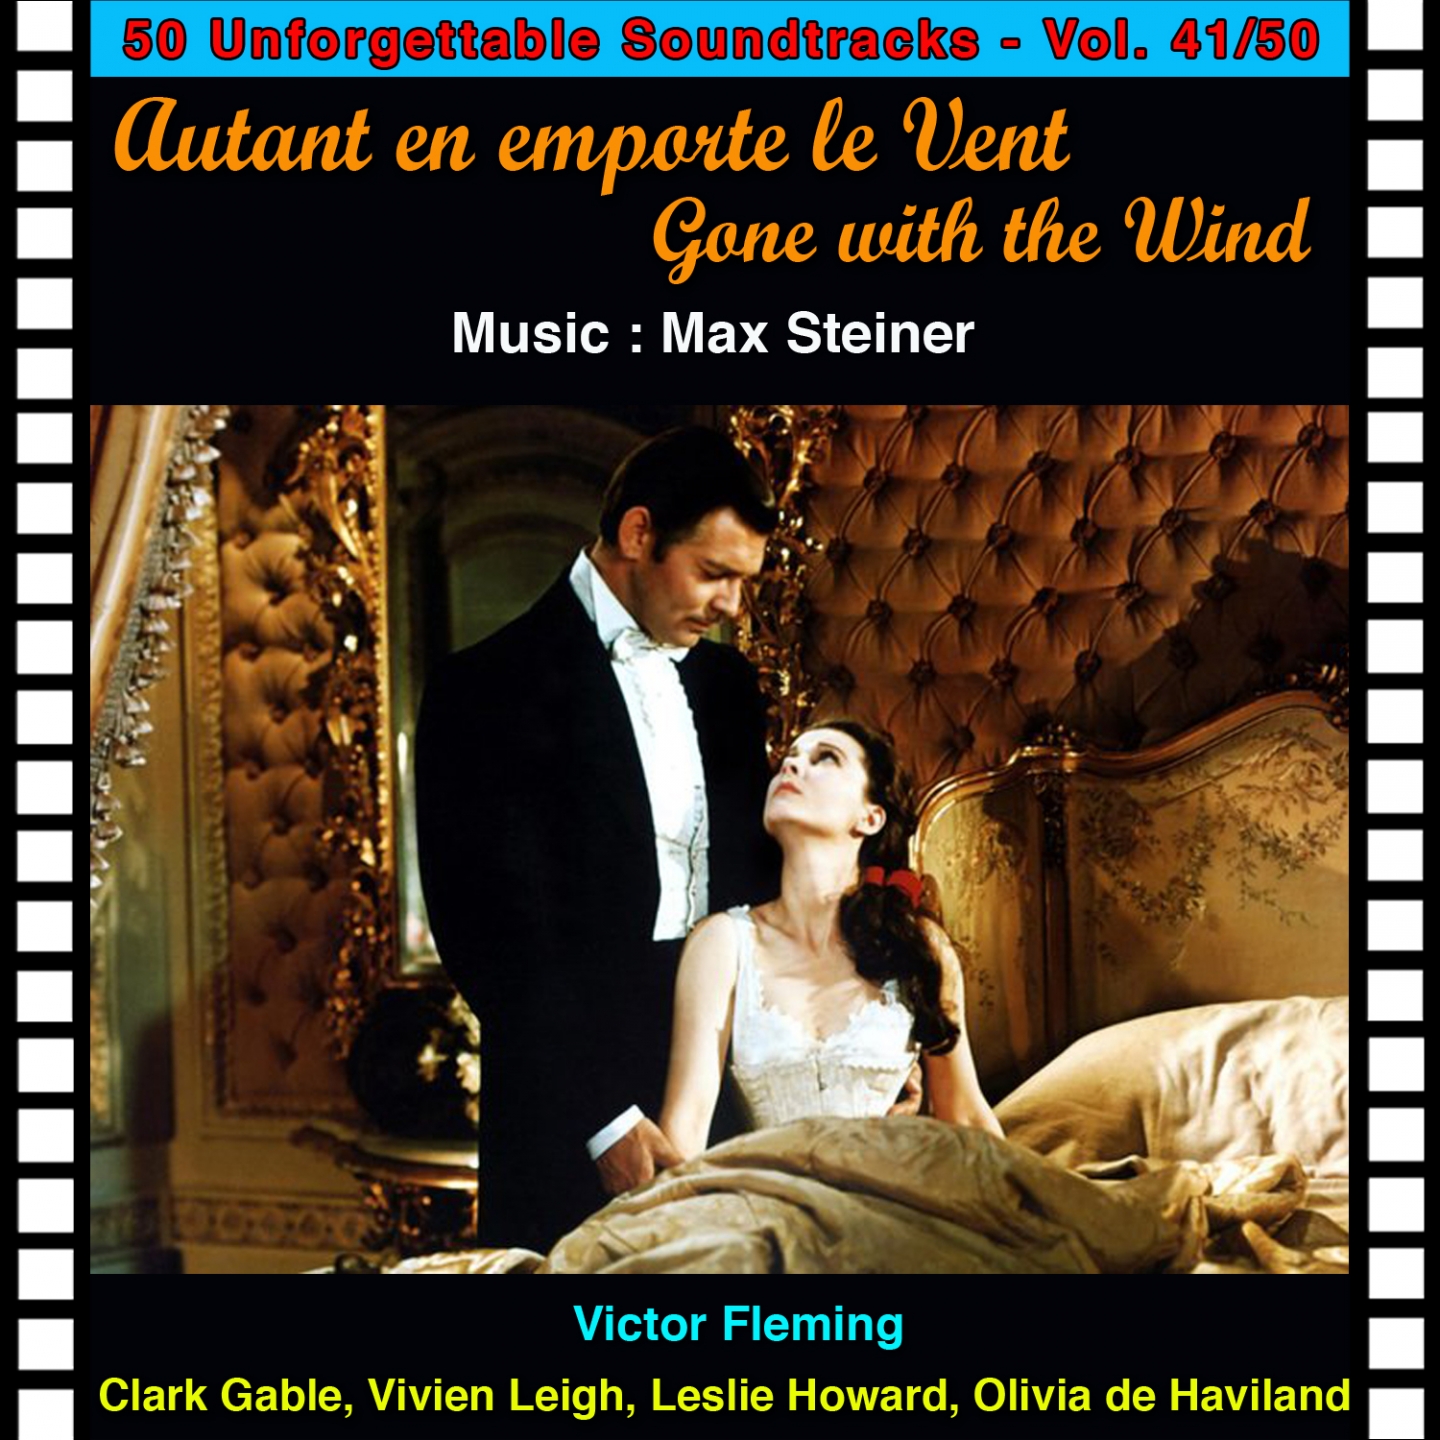 War Is Declared, Death of Charles (Autant En Emporte Le Vent - Gone with the Wind)